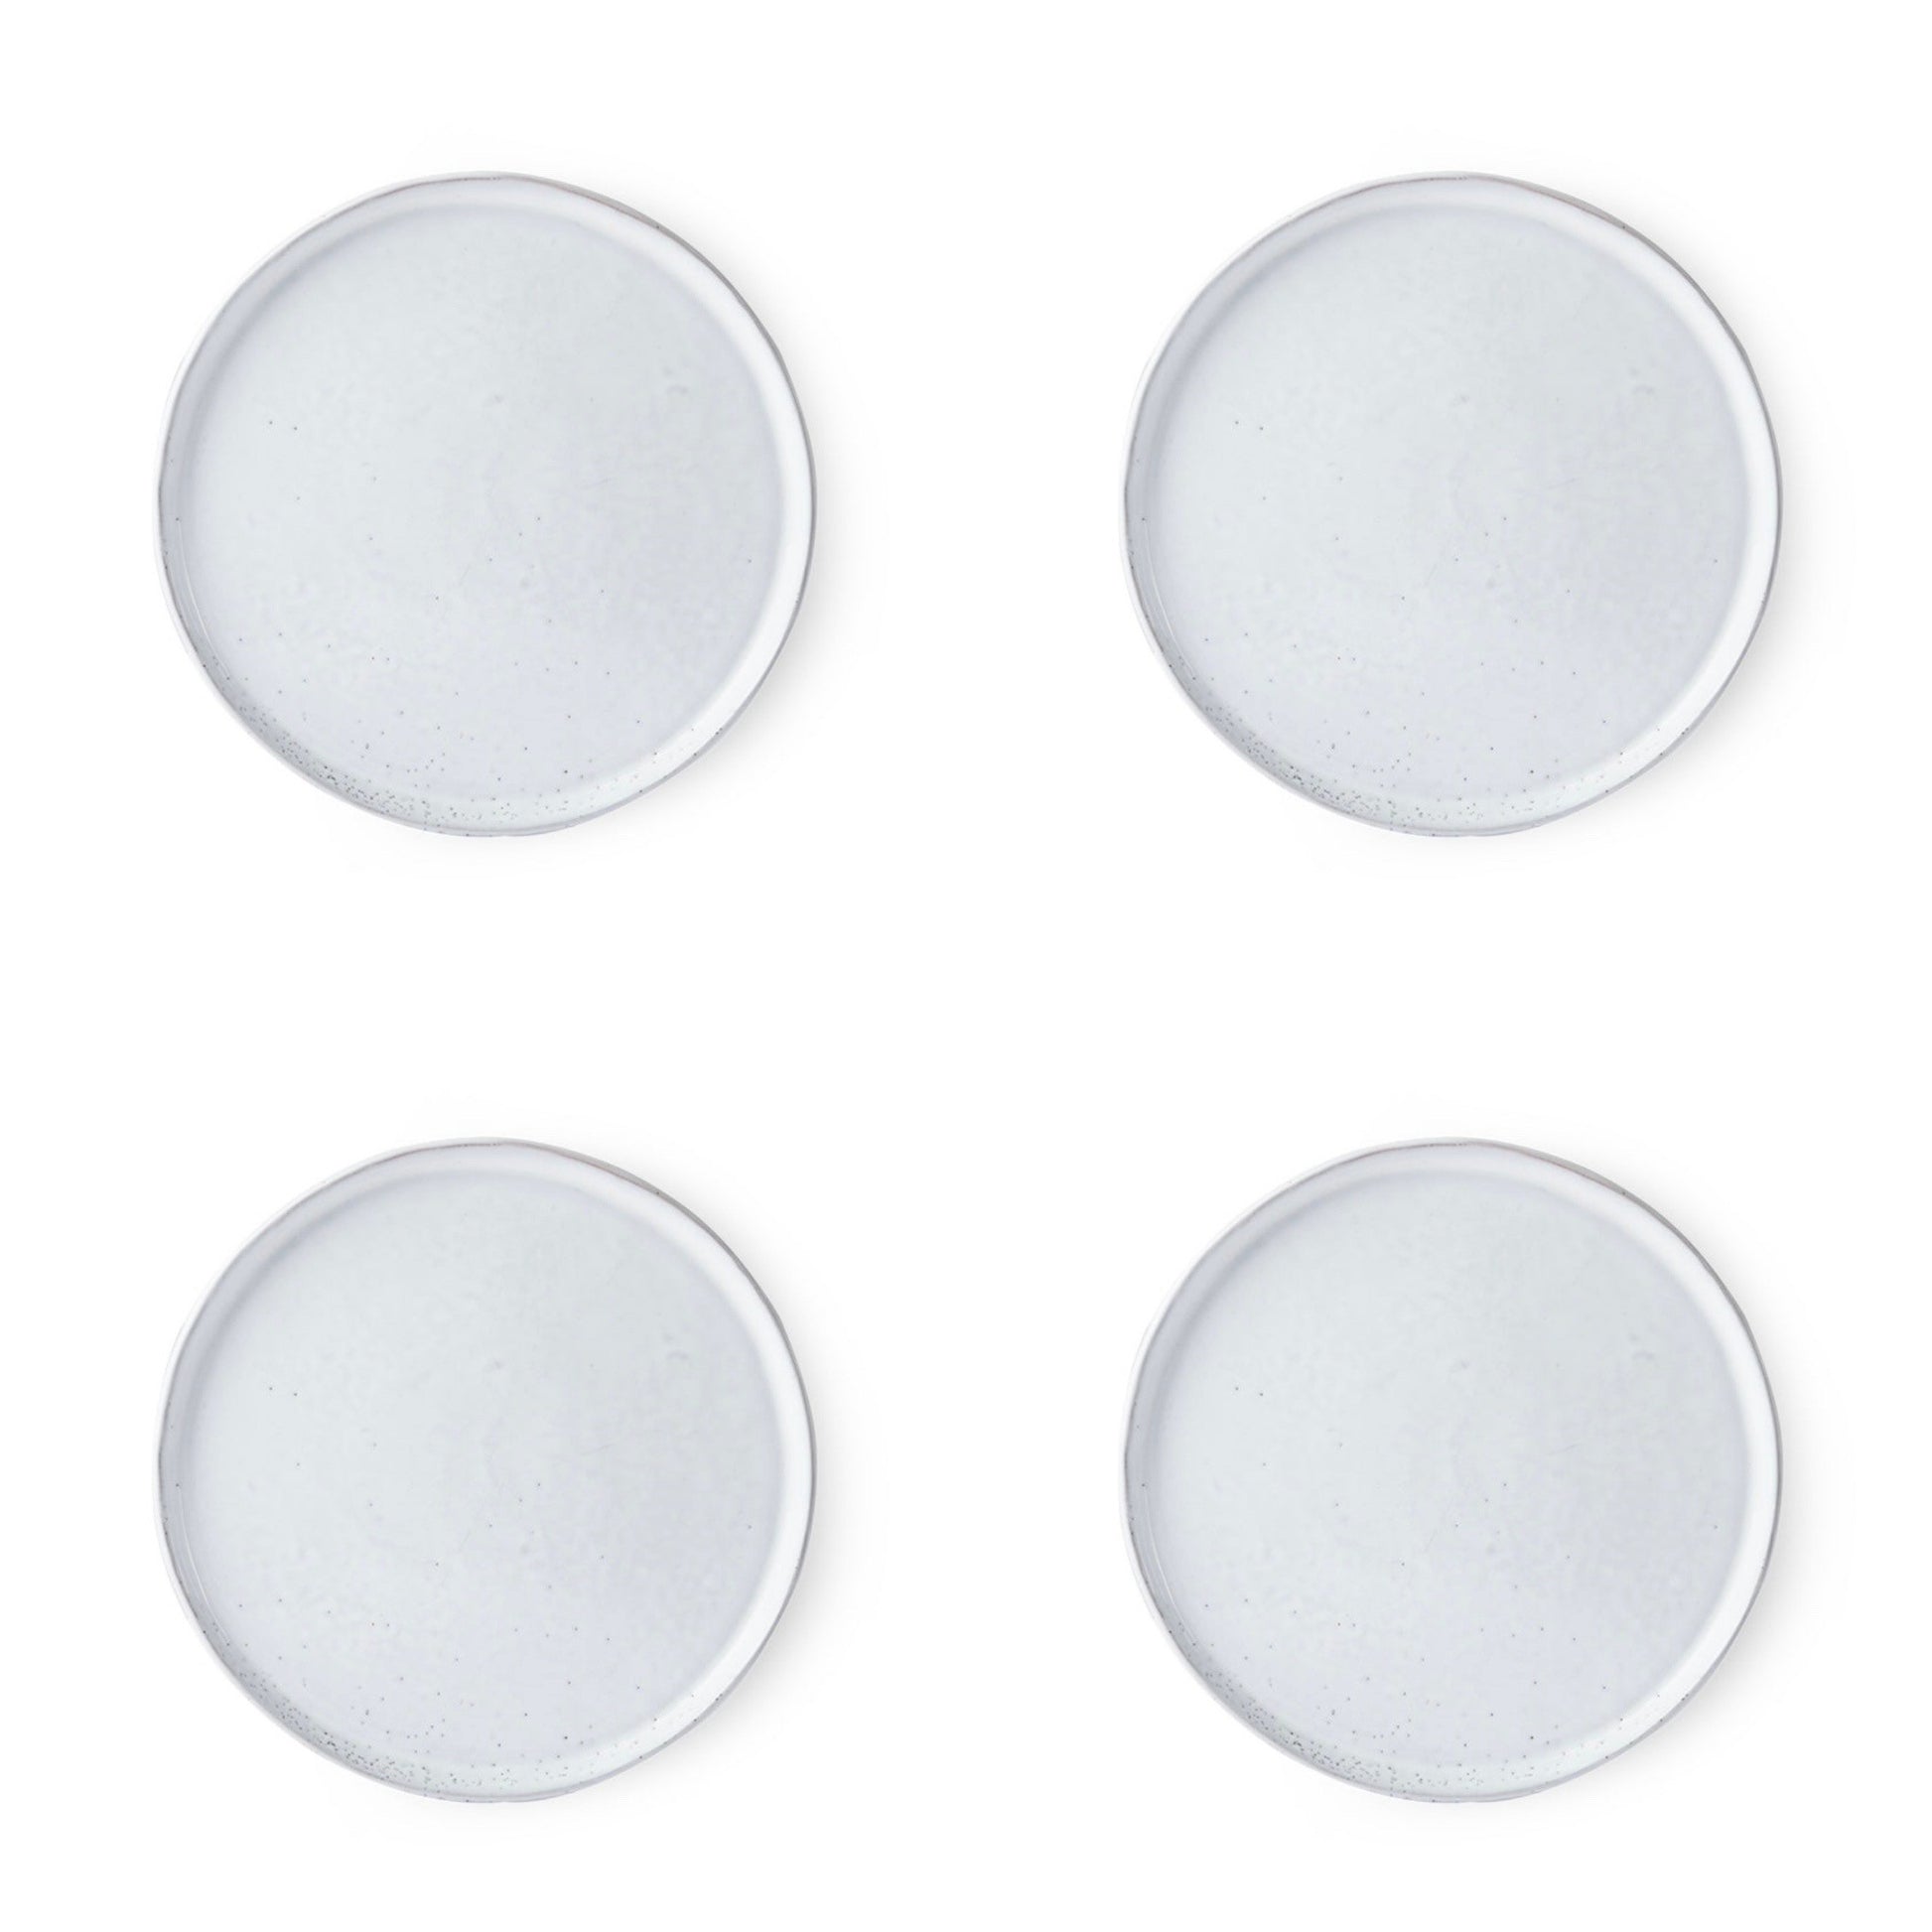 4 white speckled breakfast plates with charcoal undertone